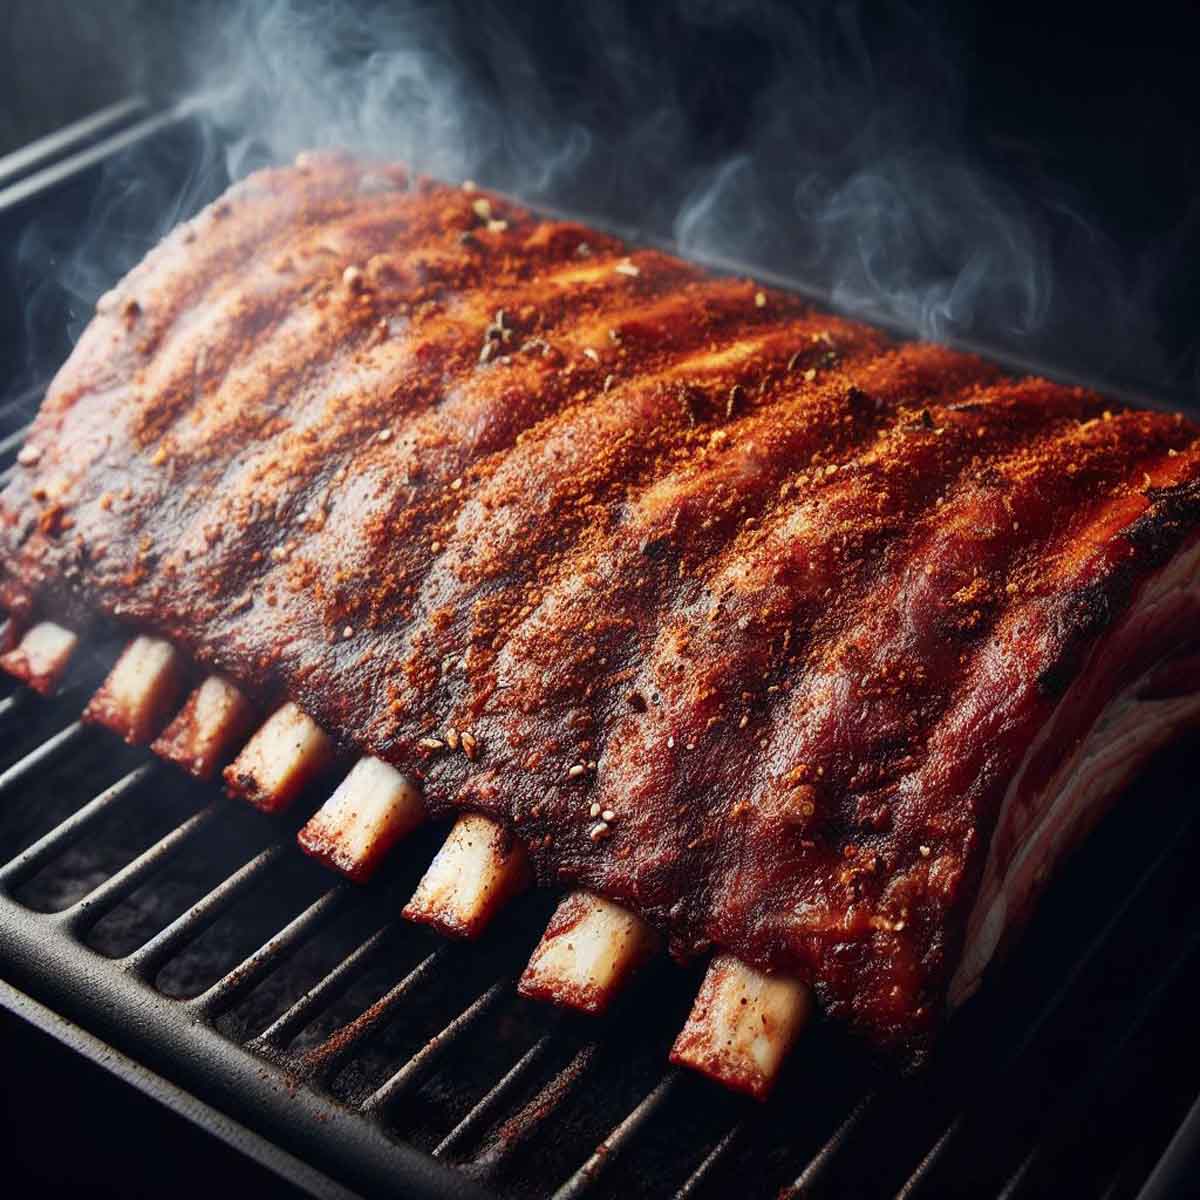 Raw ribs seasoned with dry rub, ready to be placed in a grill.